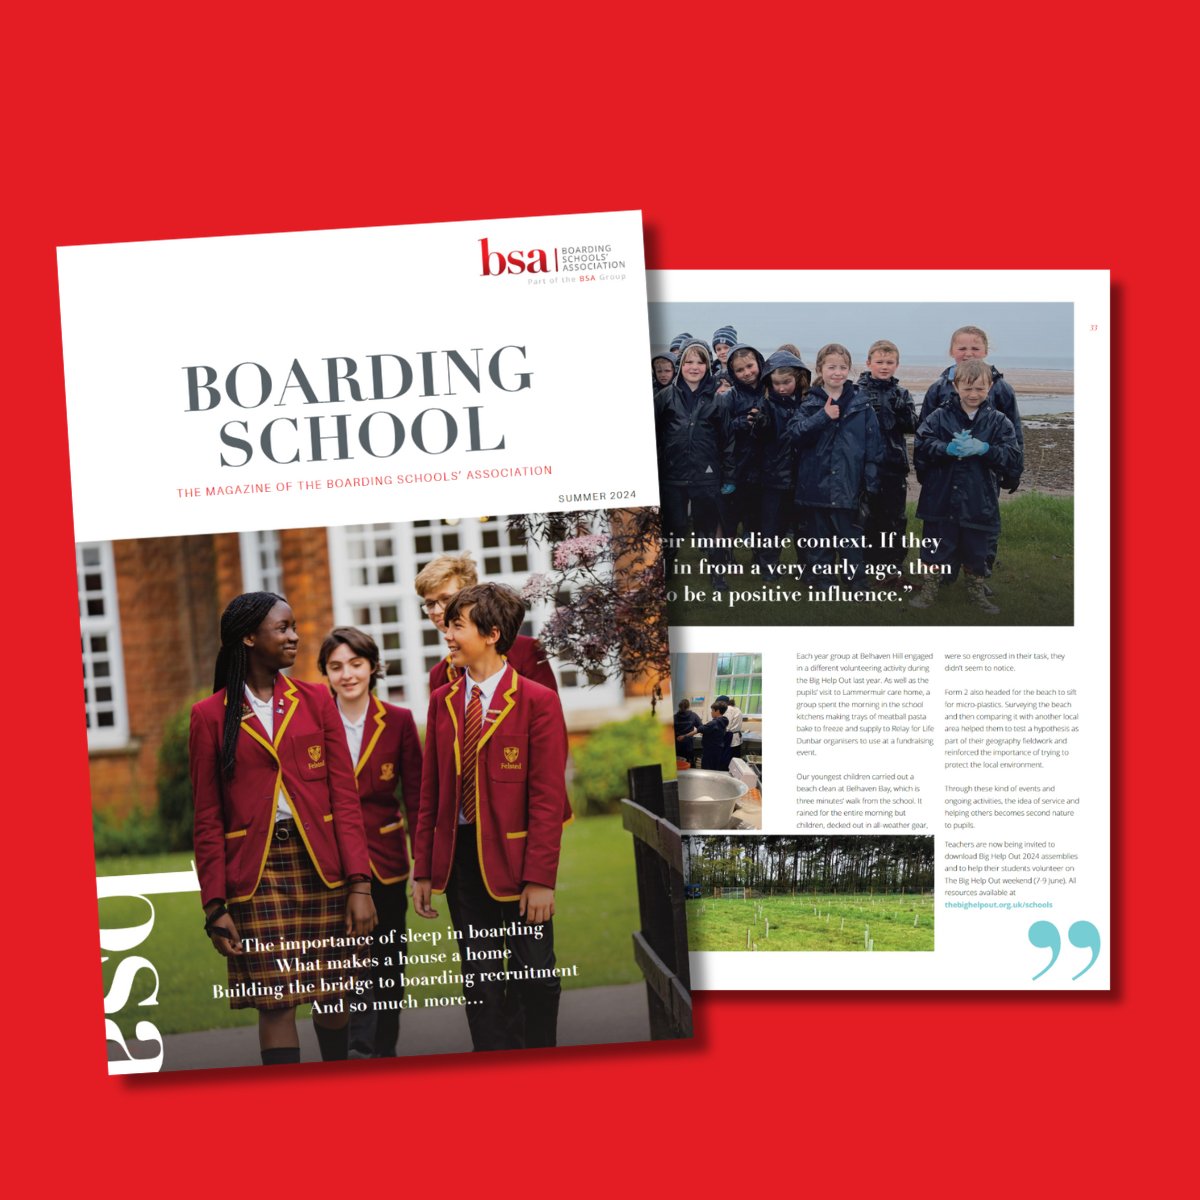 A reminder that the summer 2024 edition of the BSA Boarding School magazine is available to read via ow.ly/9i9L50RvT1E to view. #iloveboarding #supportingexcellence